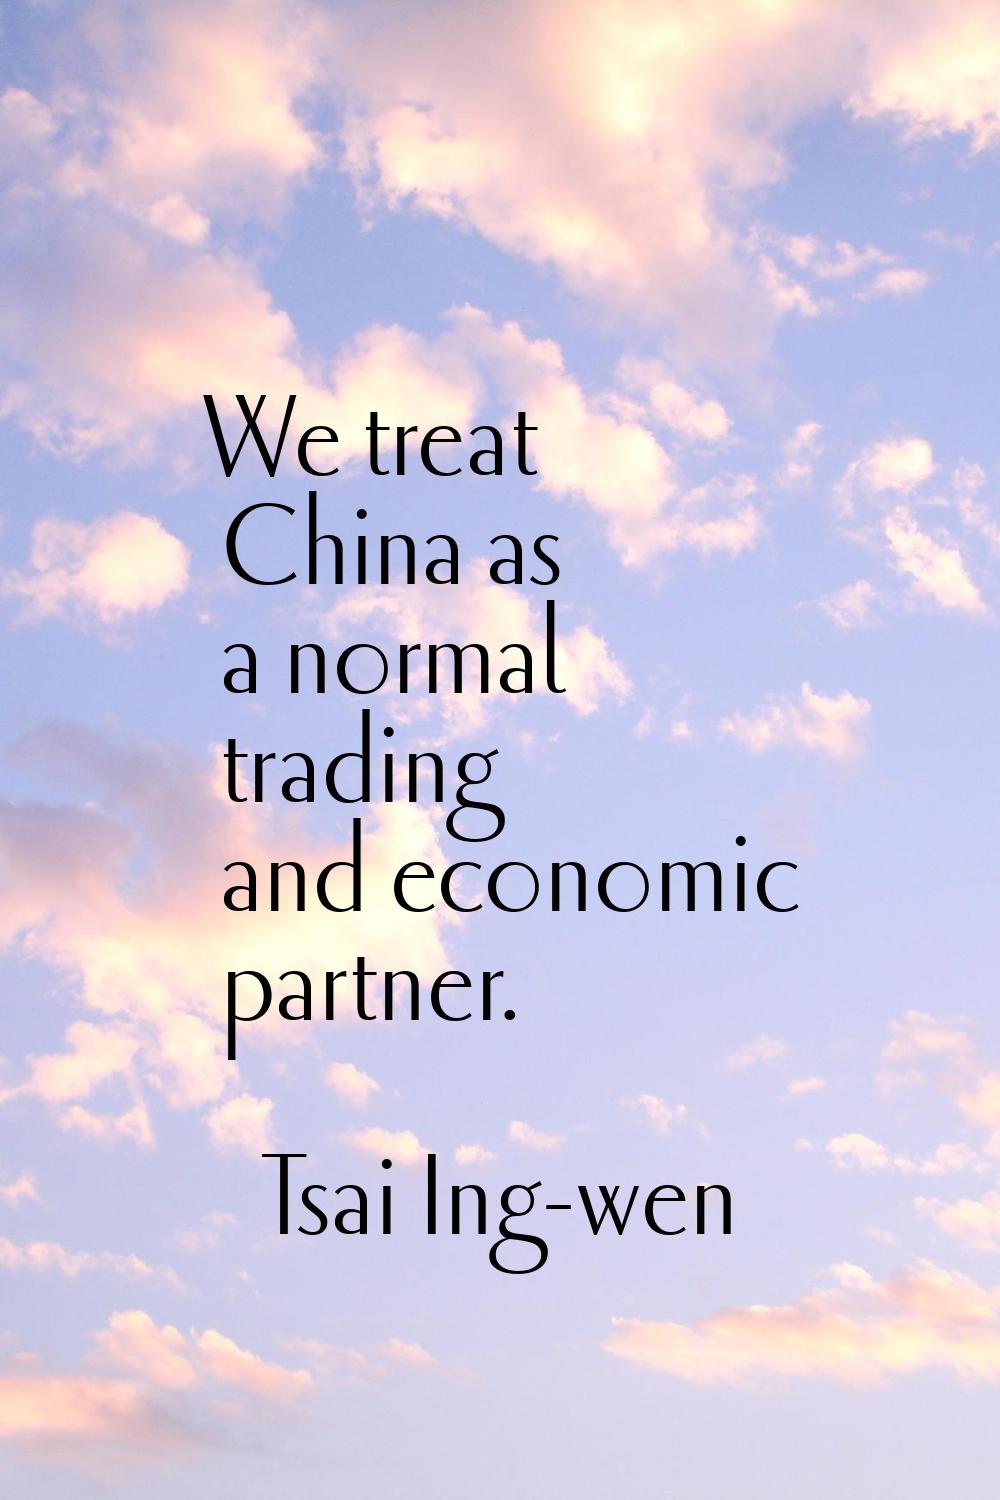 We treat China as a normal trading and economic partner.